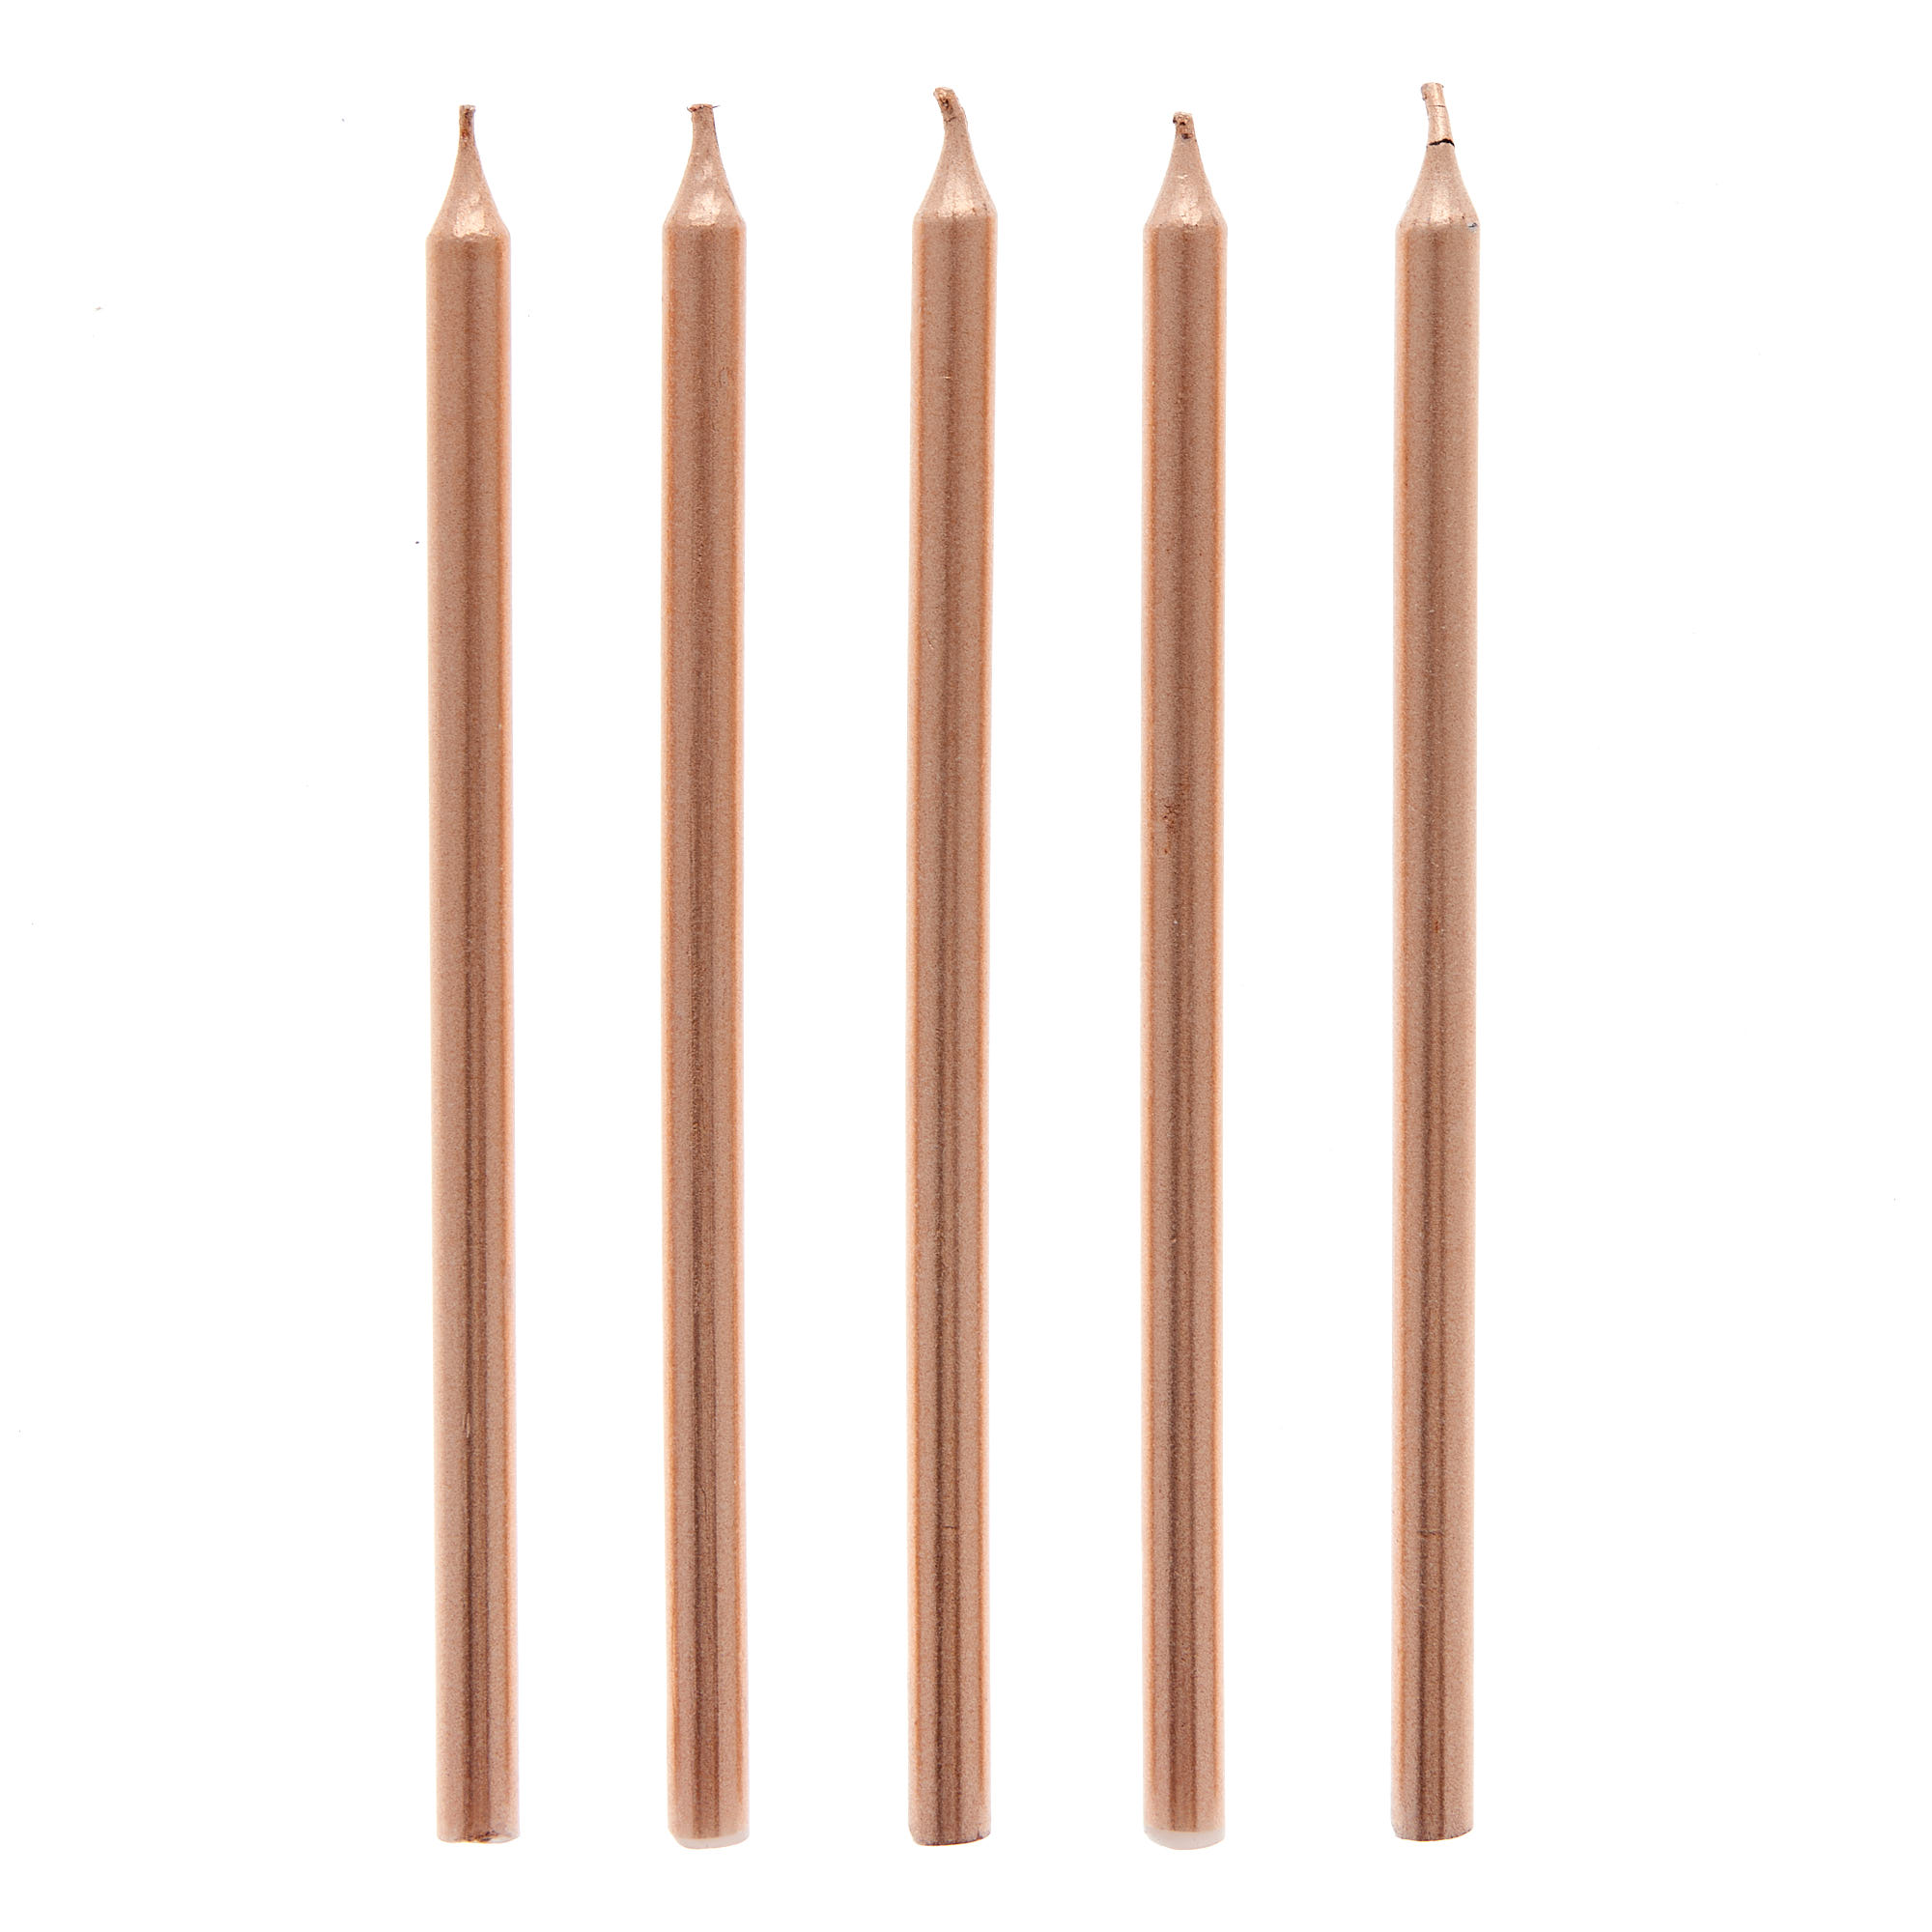 Tall Metallic Rose Gold Cake Candles & Holders - Pack of 10 